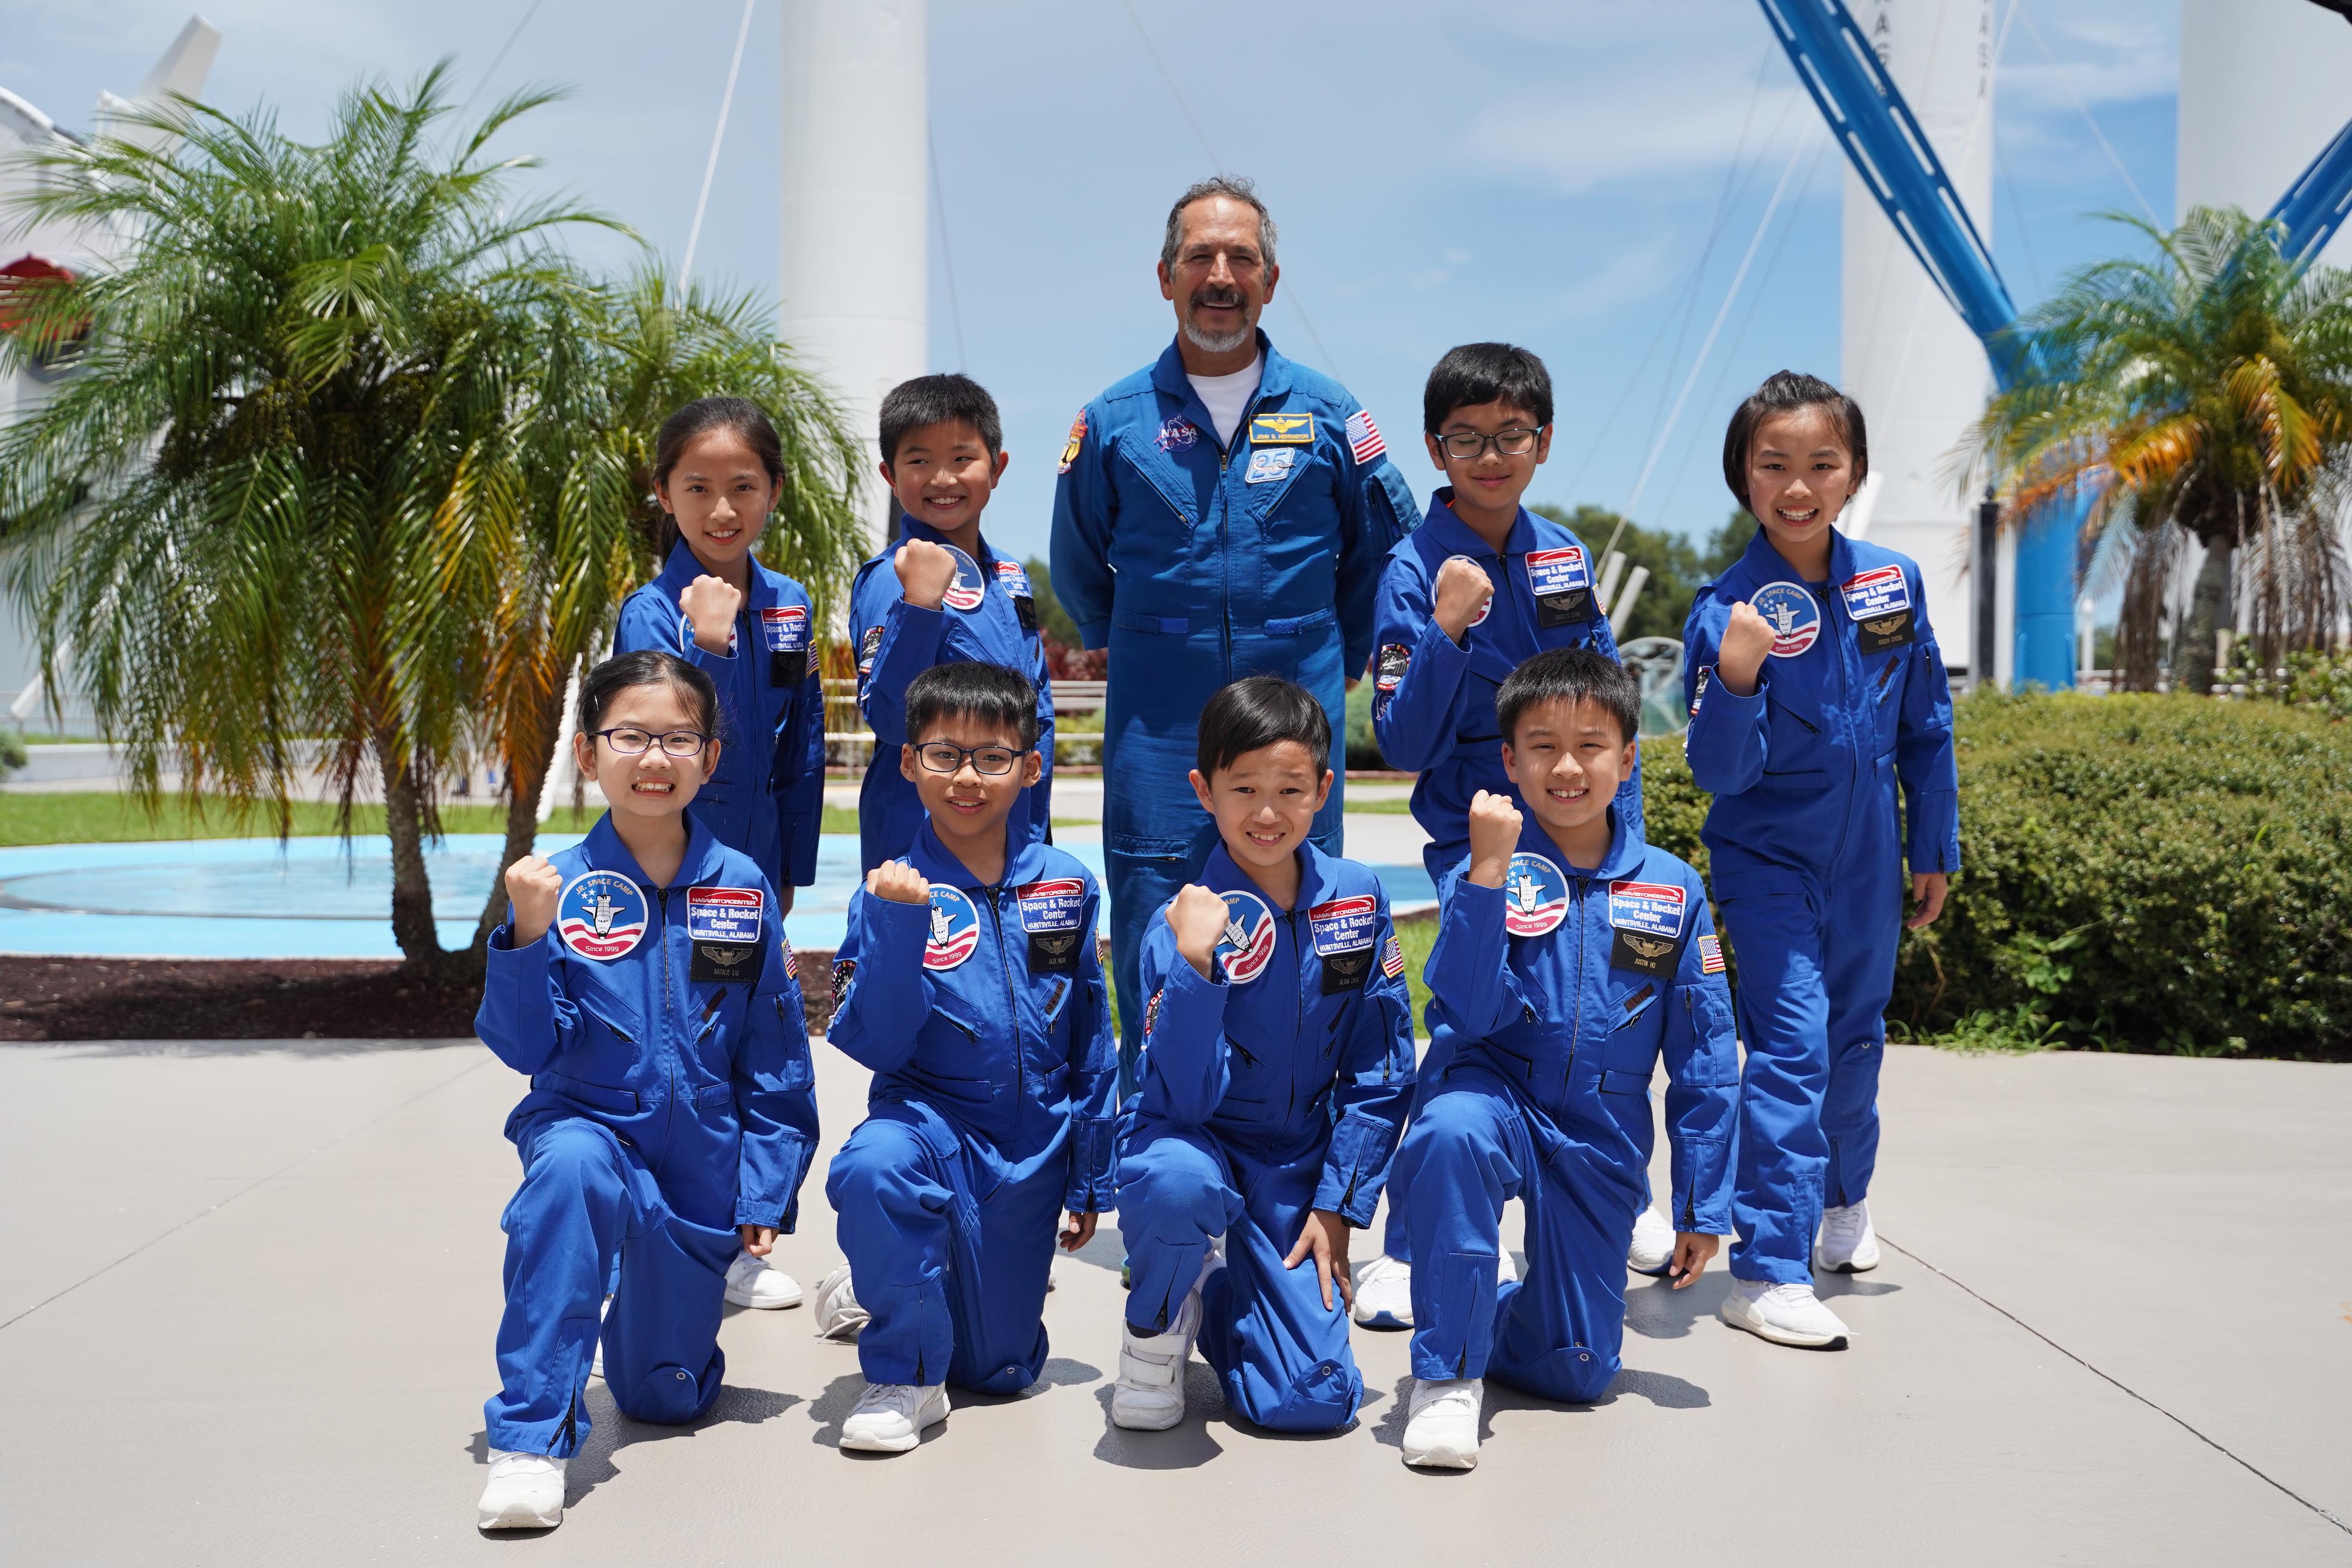 During the trip, the eight Jr. Astronauts had the opportunity to understand more about astronauts working in space from real-life astronaut John Herrington, who flew on a number of space missions.